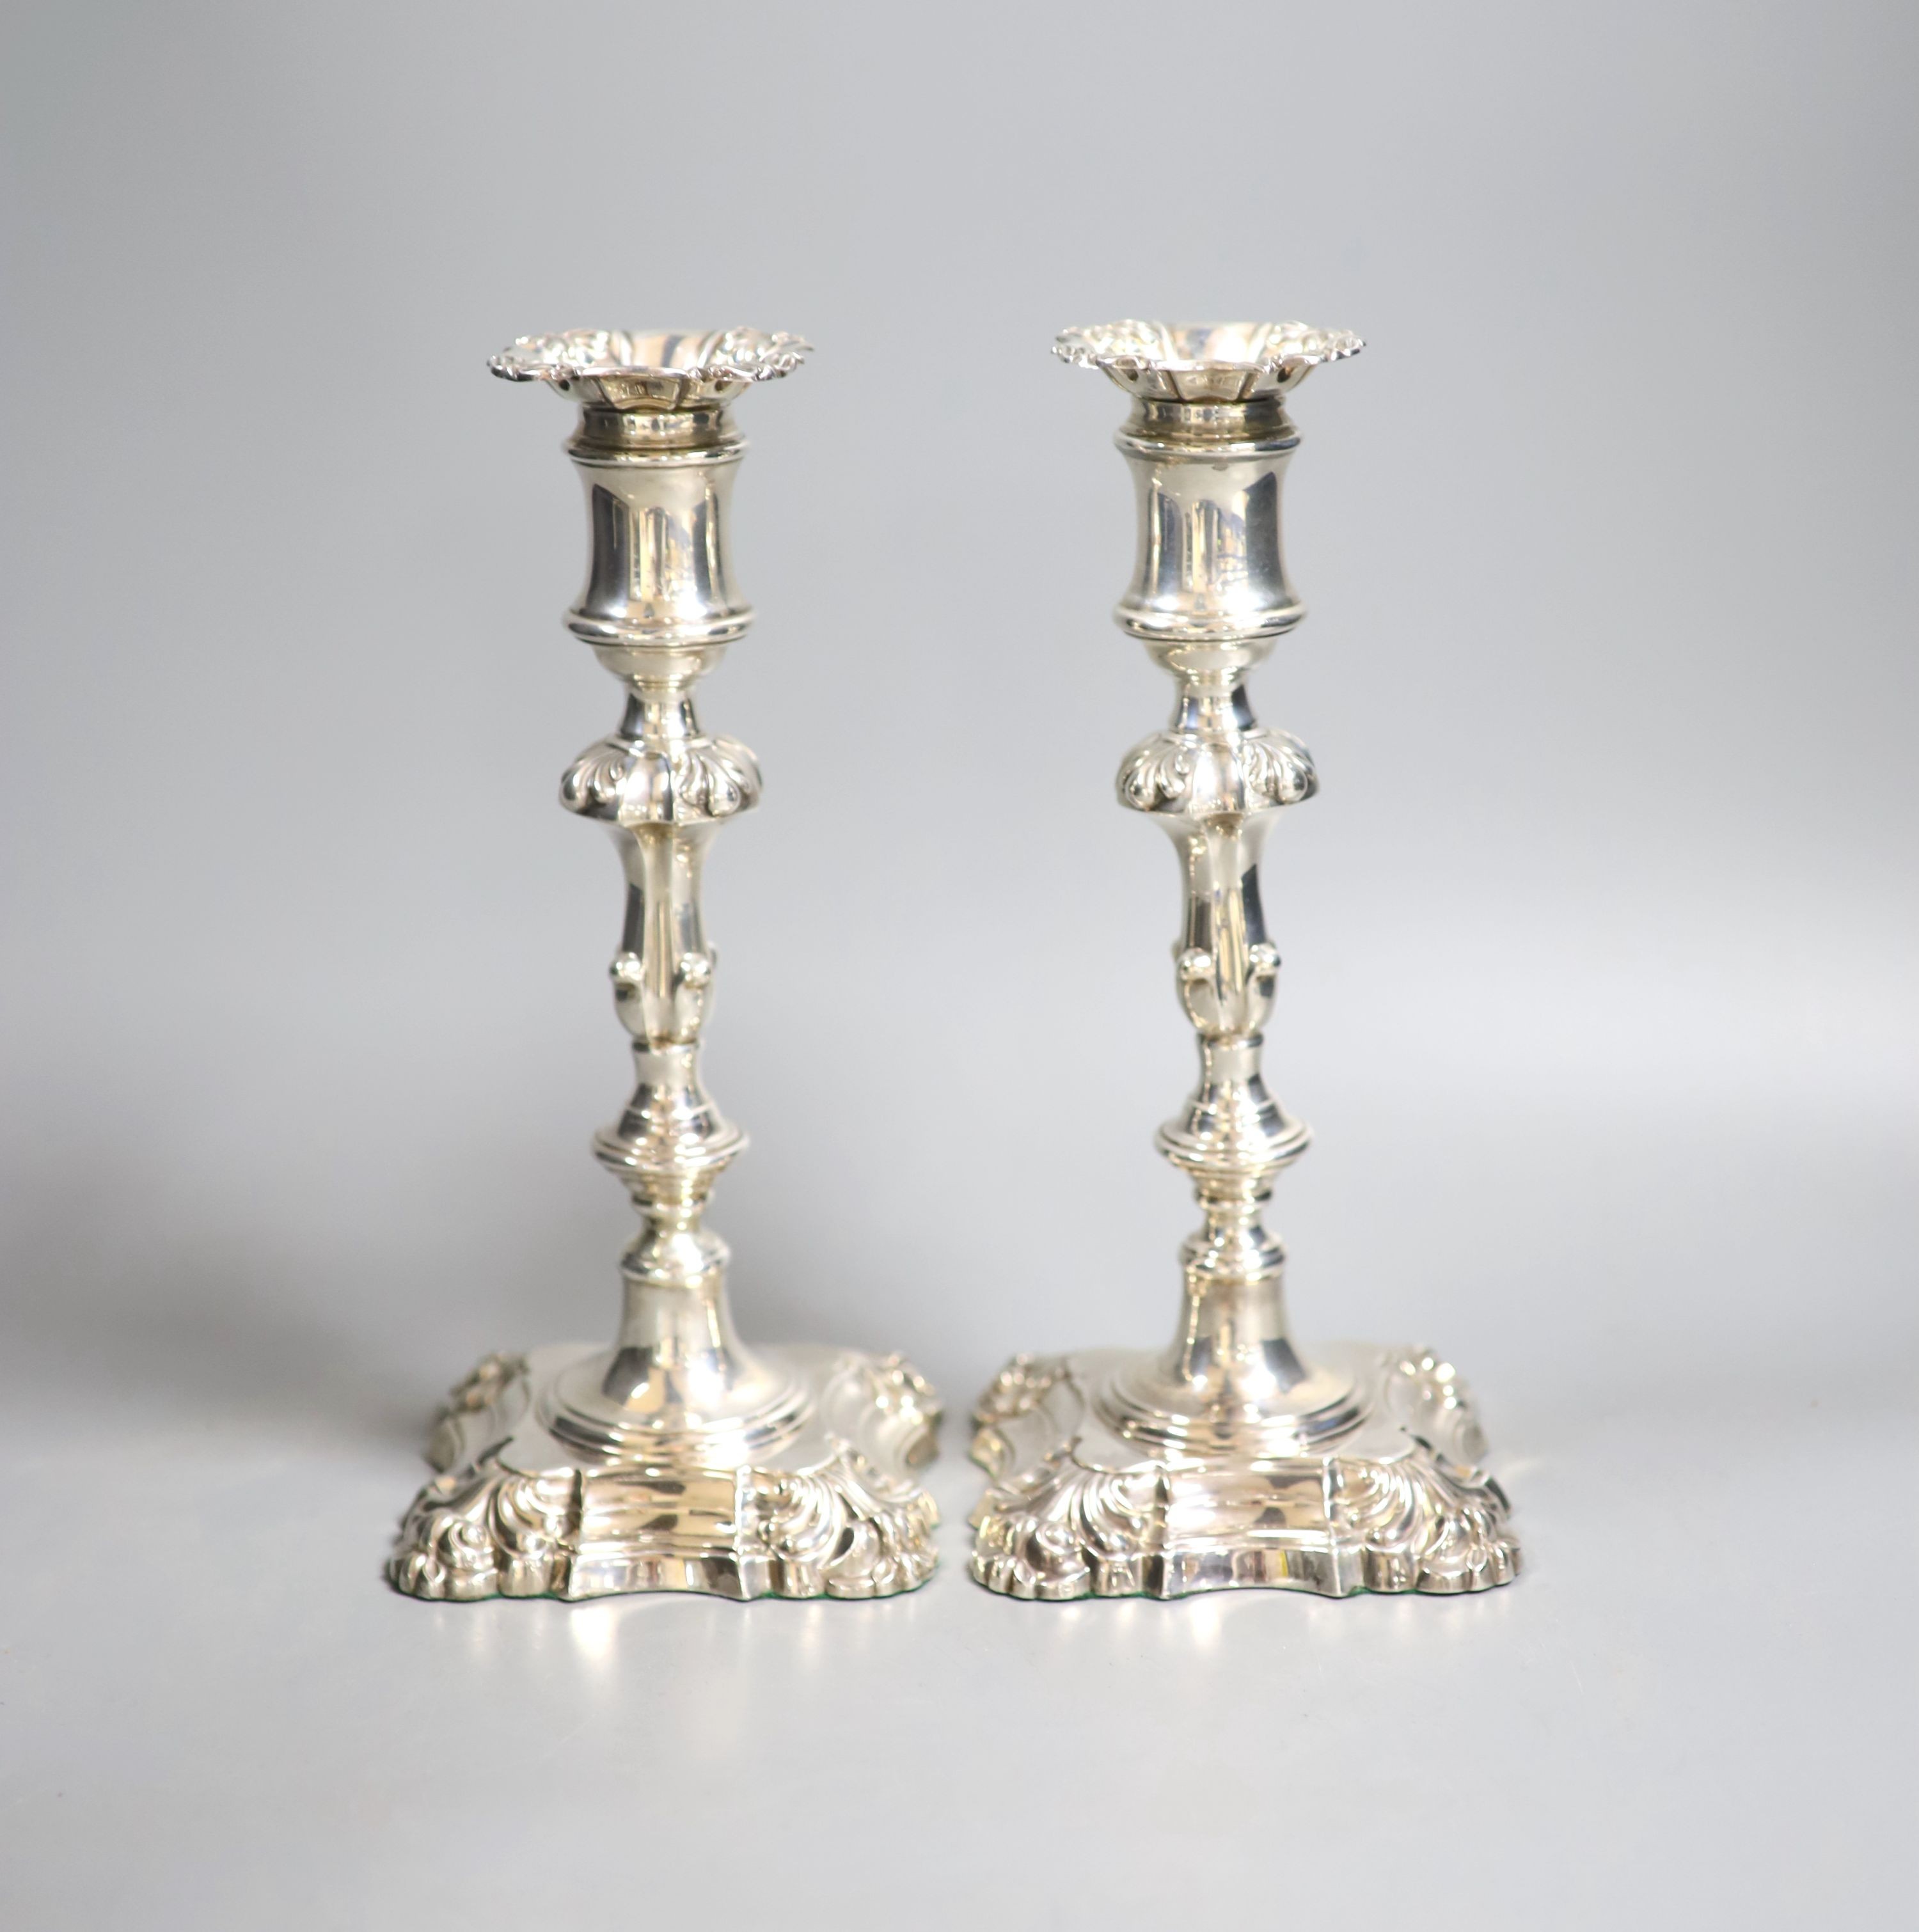 A pair of Victorian silver candlesticks, Henry Wilkinson & Co, London, 1867, (a.f.) 23.7cm, weighted.